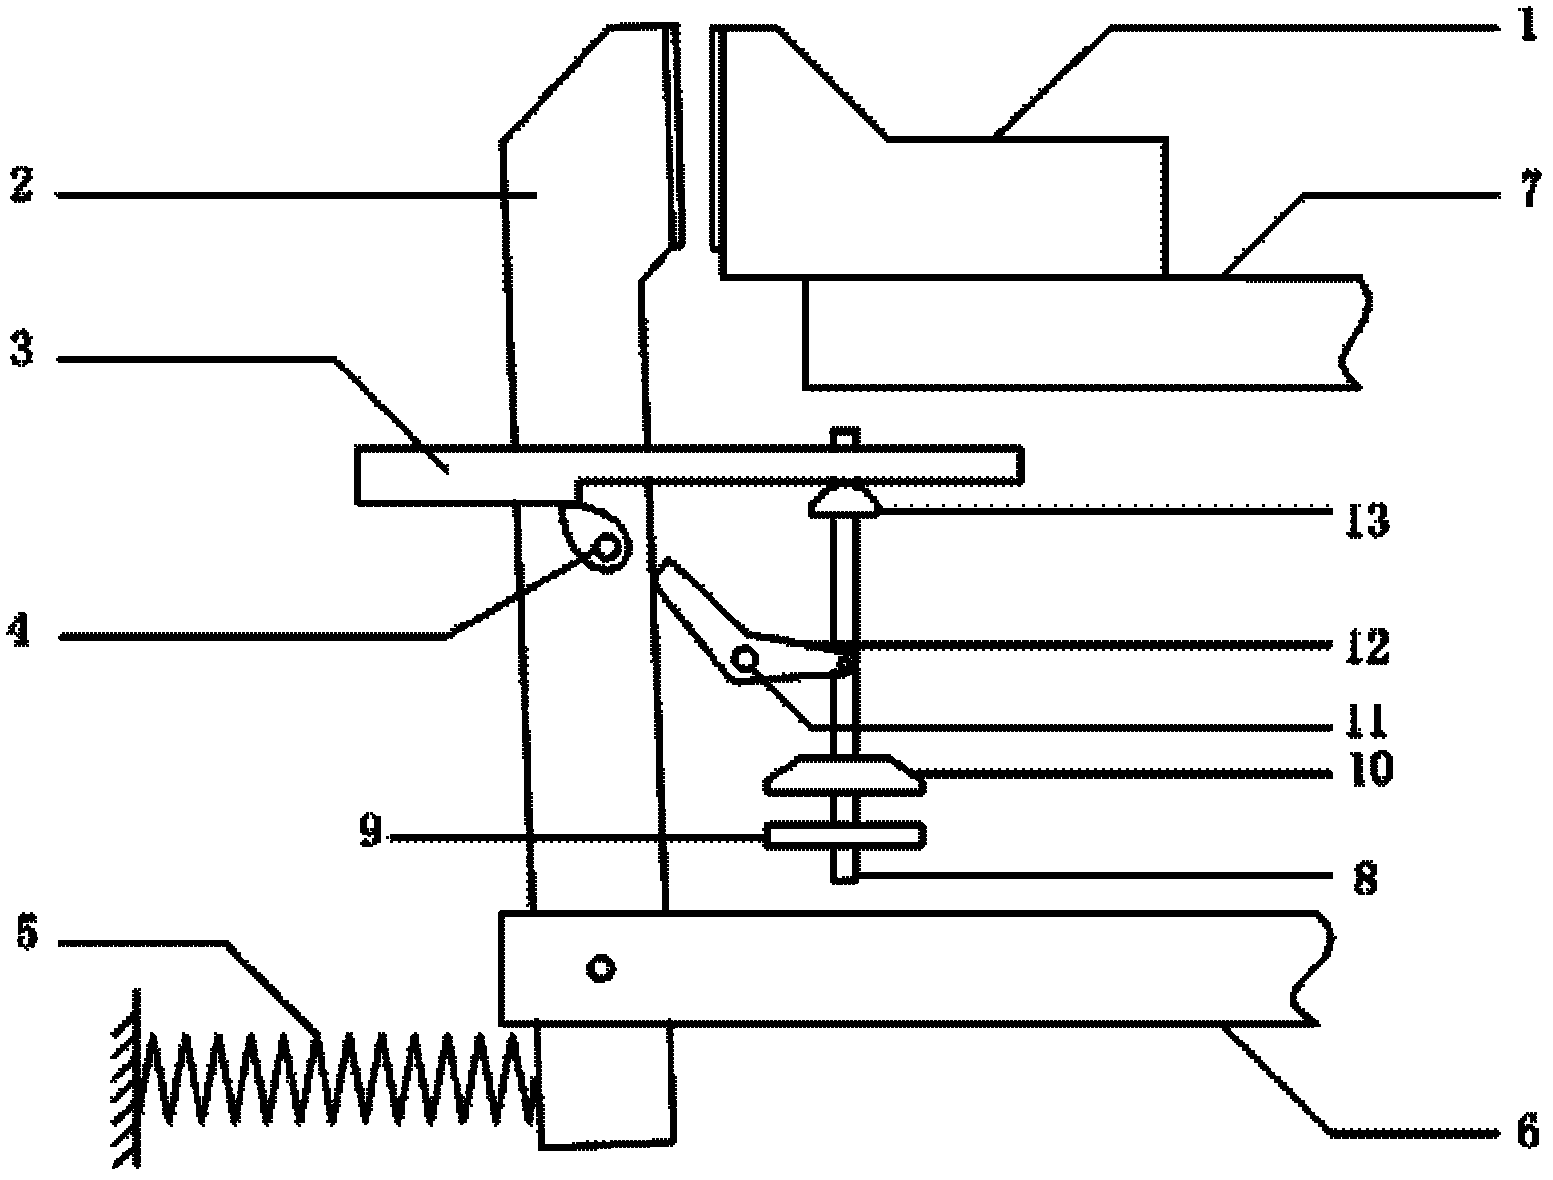 DC (direct current) circuit breaker rapid operating mechanism with current limiting characteristic